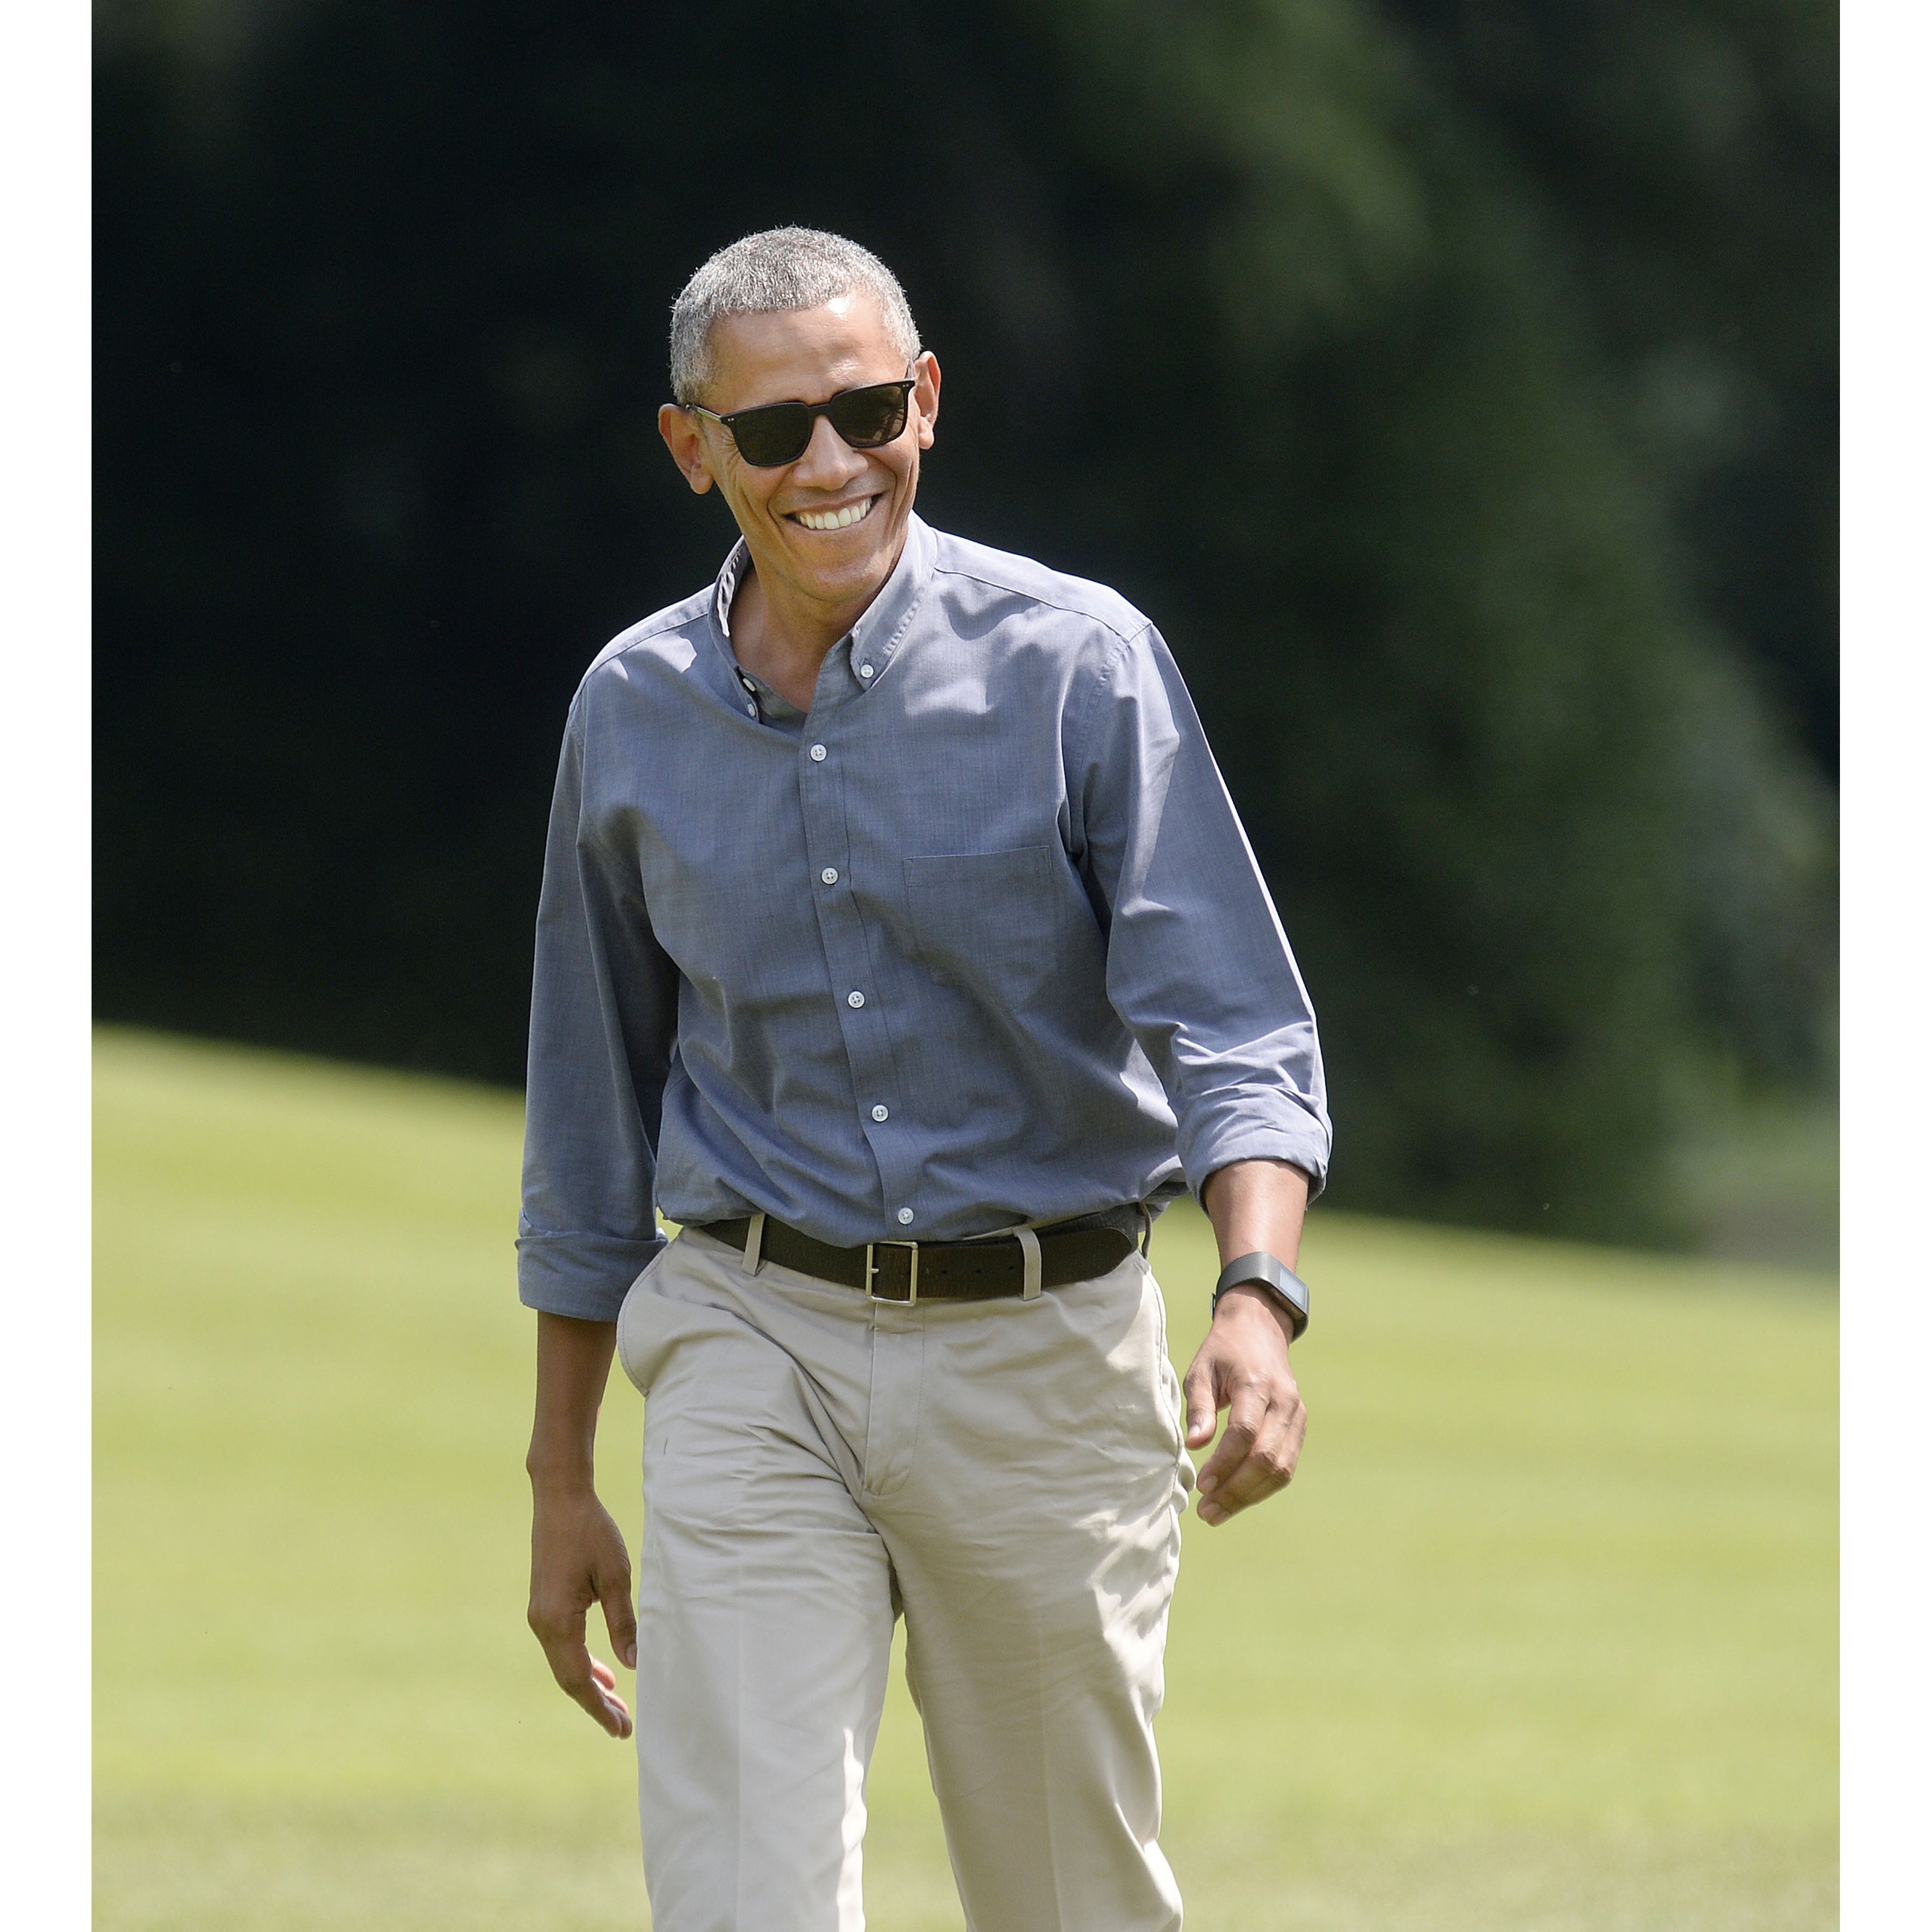 Definitive Proof That Barack Obama Was The Swaggiest President Ever
